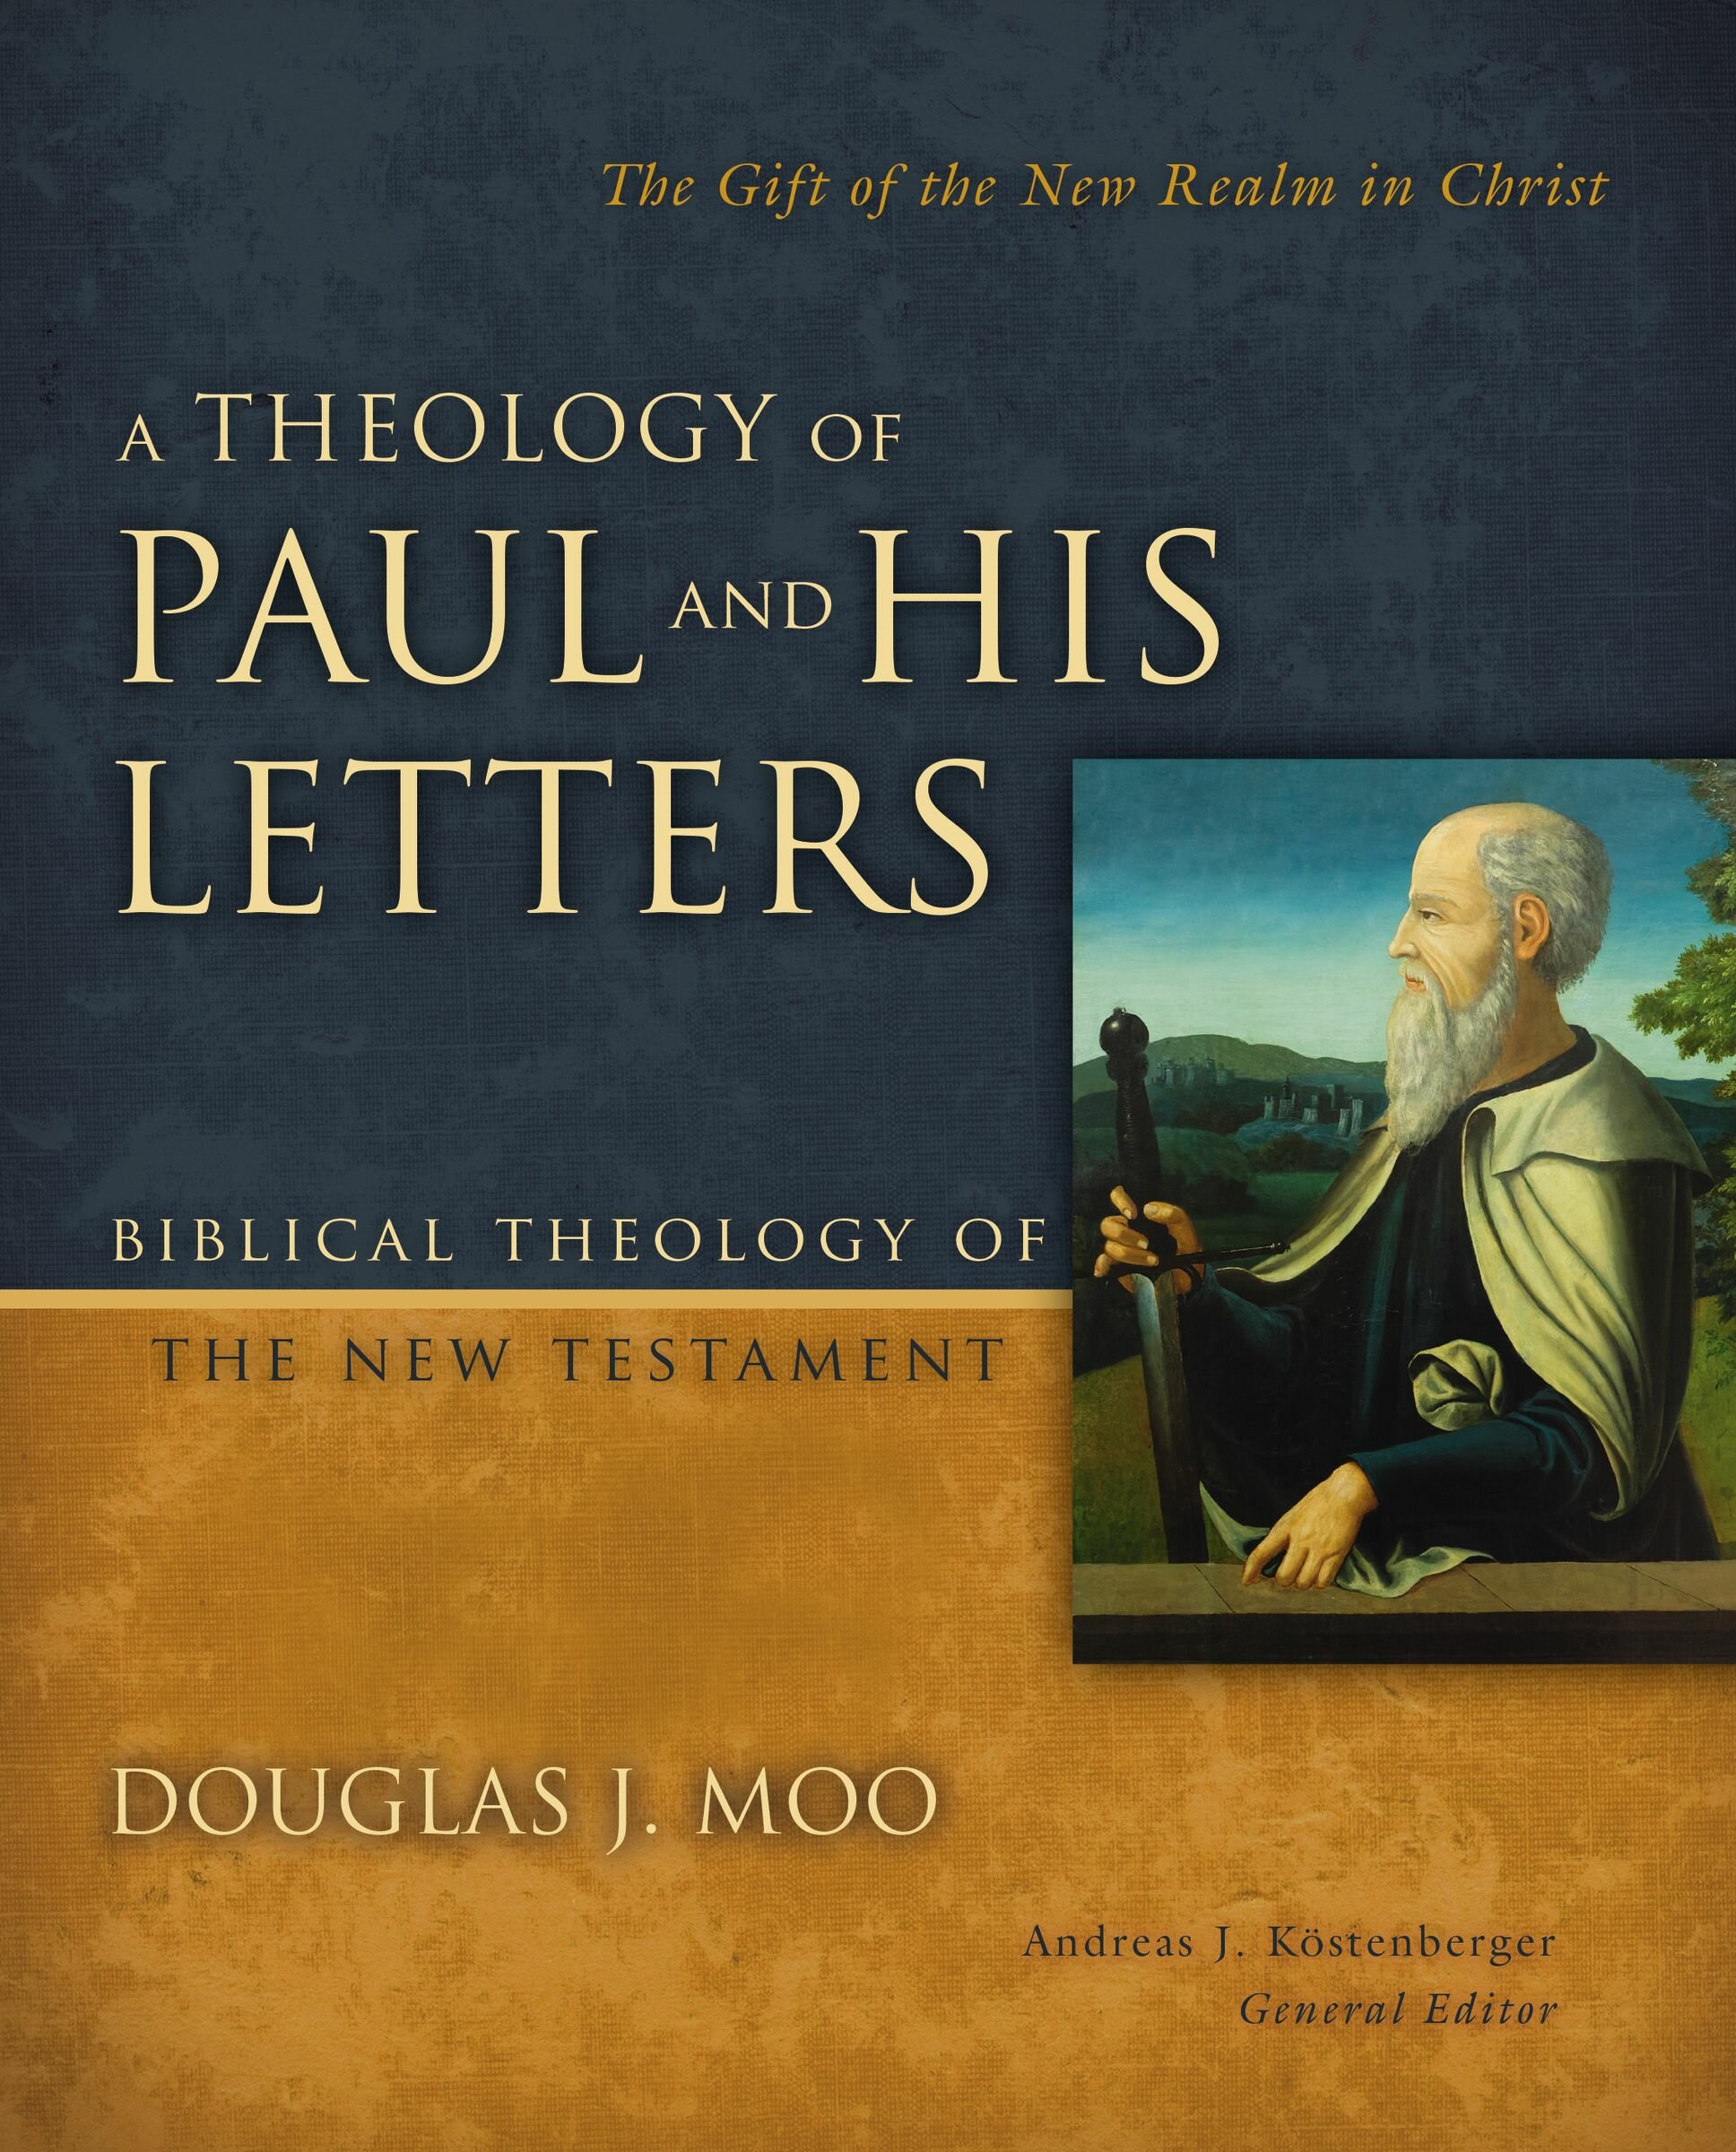 A Theology of Paul and His Letters: The Gift of the New Realm in Christ (Biblical Theology of the New Testament | BTNT)